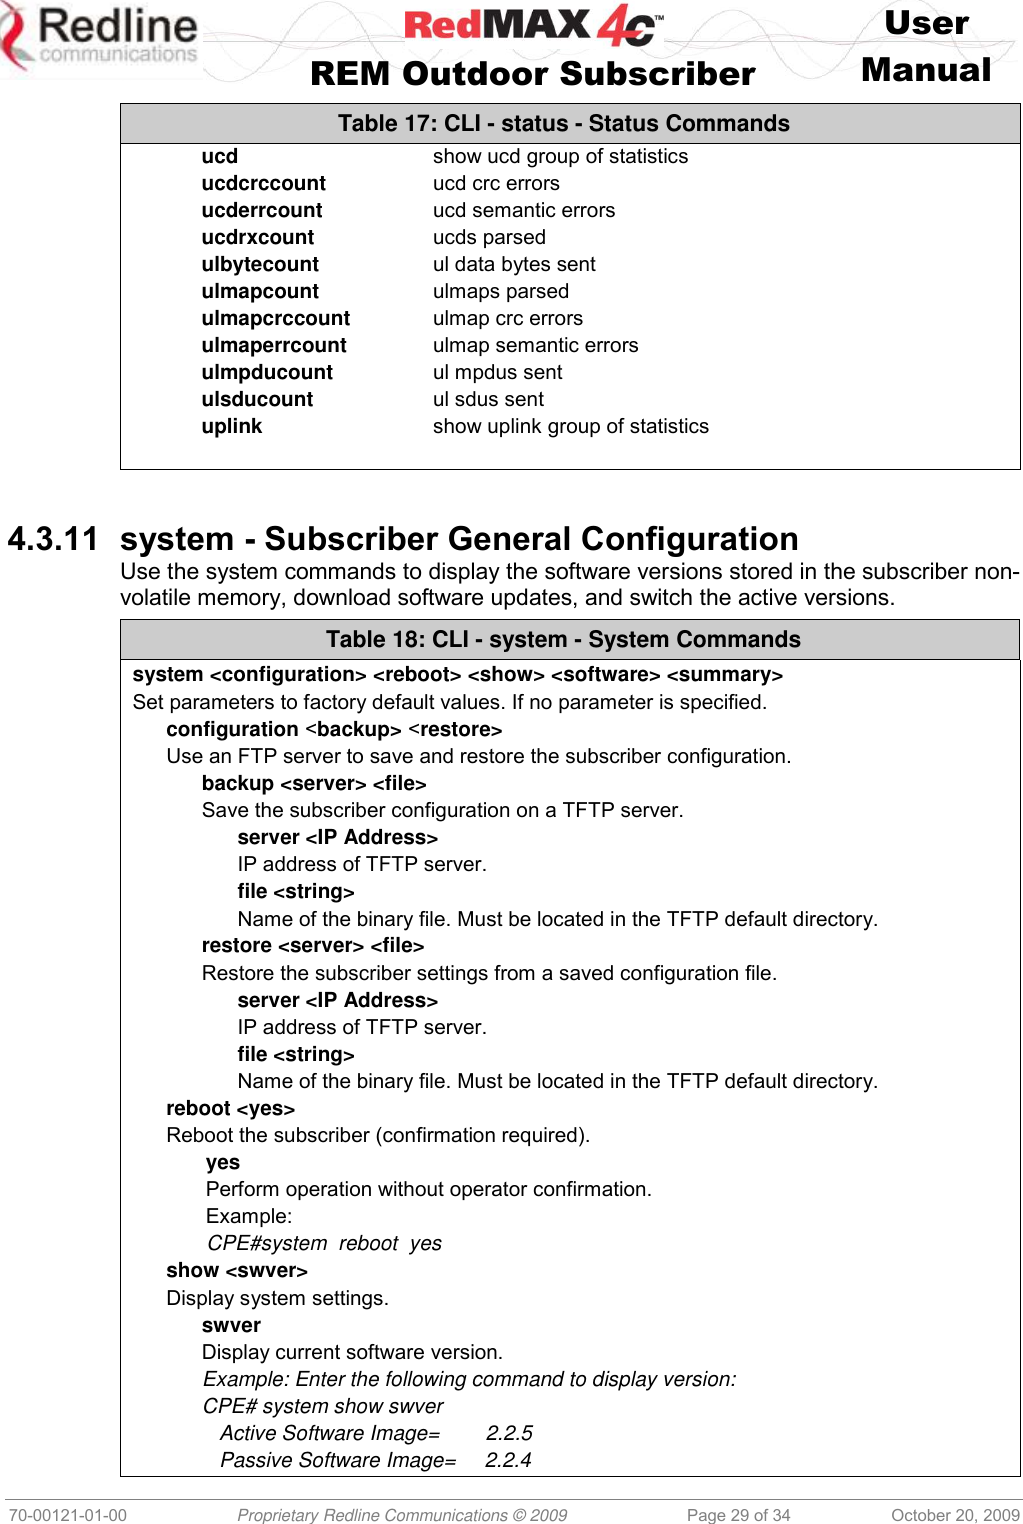    User   REM Outdoor Subscriber  Manual   70-00121-01-00 Proprietary Redline Communications © 2009 Page 29 of 34 October 20, 2009 Table 17: CLI - status - Status Commands ucd  show ucd group of statistics ucdcrccount  ucd crc errors ucderrcount  ucd semantic errors ucdrxcount  ucds parsed ulbytecount  ul data bytes sent ulmapcount  ulmaps parsed ulmapcrccount  ulmap crc errors ulmaperrcount  ulmap semantic errors ulmpducount  ul mpdus sent ulsducount  ul sdus sent uplink  show uplink group of statistics    4.3.11 system - Subscriber General Configuration Use the system commands to display the software versions stored in the subscriber non-volatile memory, download software updates, and switch the active versions. Table 18: CLI - system - System Commands system &lt;configuration&gt; &lt;reboot&gt; &lt;show&gt; &lt;software&gt; &lt;summary&gt; Set parameters to factory default values. If no parameter is specified. configuration &lt;backup&gt; &lt;restore&gt; Use an FTP server to save and restore the subscriber configuration. backup &lt;server&gt; &lt;file&gt; Save the subscriber configuration on a TFTP server. server &lt;IP Address&gt; IP address of TFTP server. file &lt;string&gt; Name of the binary file. Must be located in the TFTP default directory. restore &lt;server&gt; &lt;file&gt; Restore the subscriber settings from a saved configuration file. server &lt;IP Address&gt; IP address of TFTP server. file &lt;string&gt; Name of the binary file. Must be located in the TFTP default directory. reboot &lt;yes&gt; Reboot the subscriber (confirmation required). yes Perform operation without operator confirmation. Example:  CPE#system  reboot  yes show &lt;swver&gt; Display system settings. swver Display current software version. Example: Enter the following command to display version: CPE# system show swver    Active Software Image=        2.2.5    Passive Software Image=     2.2.4 